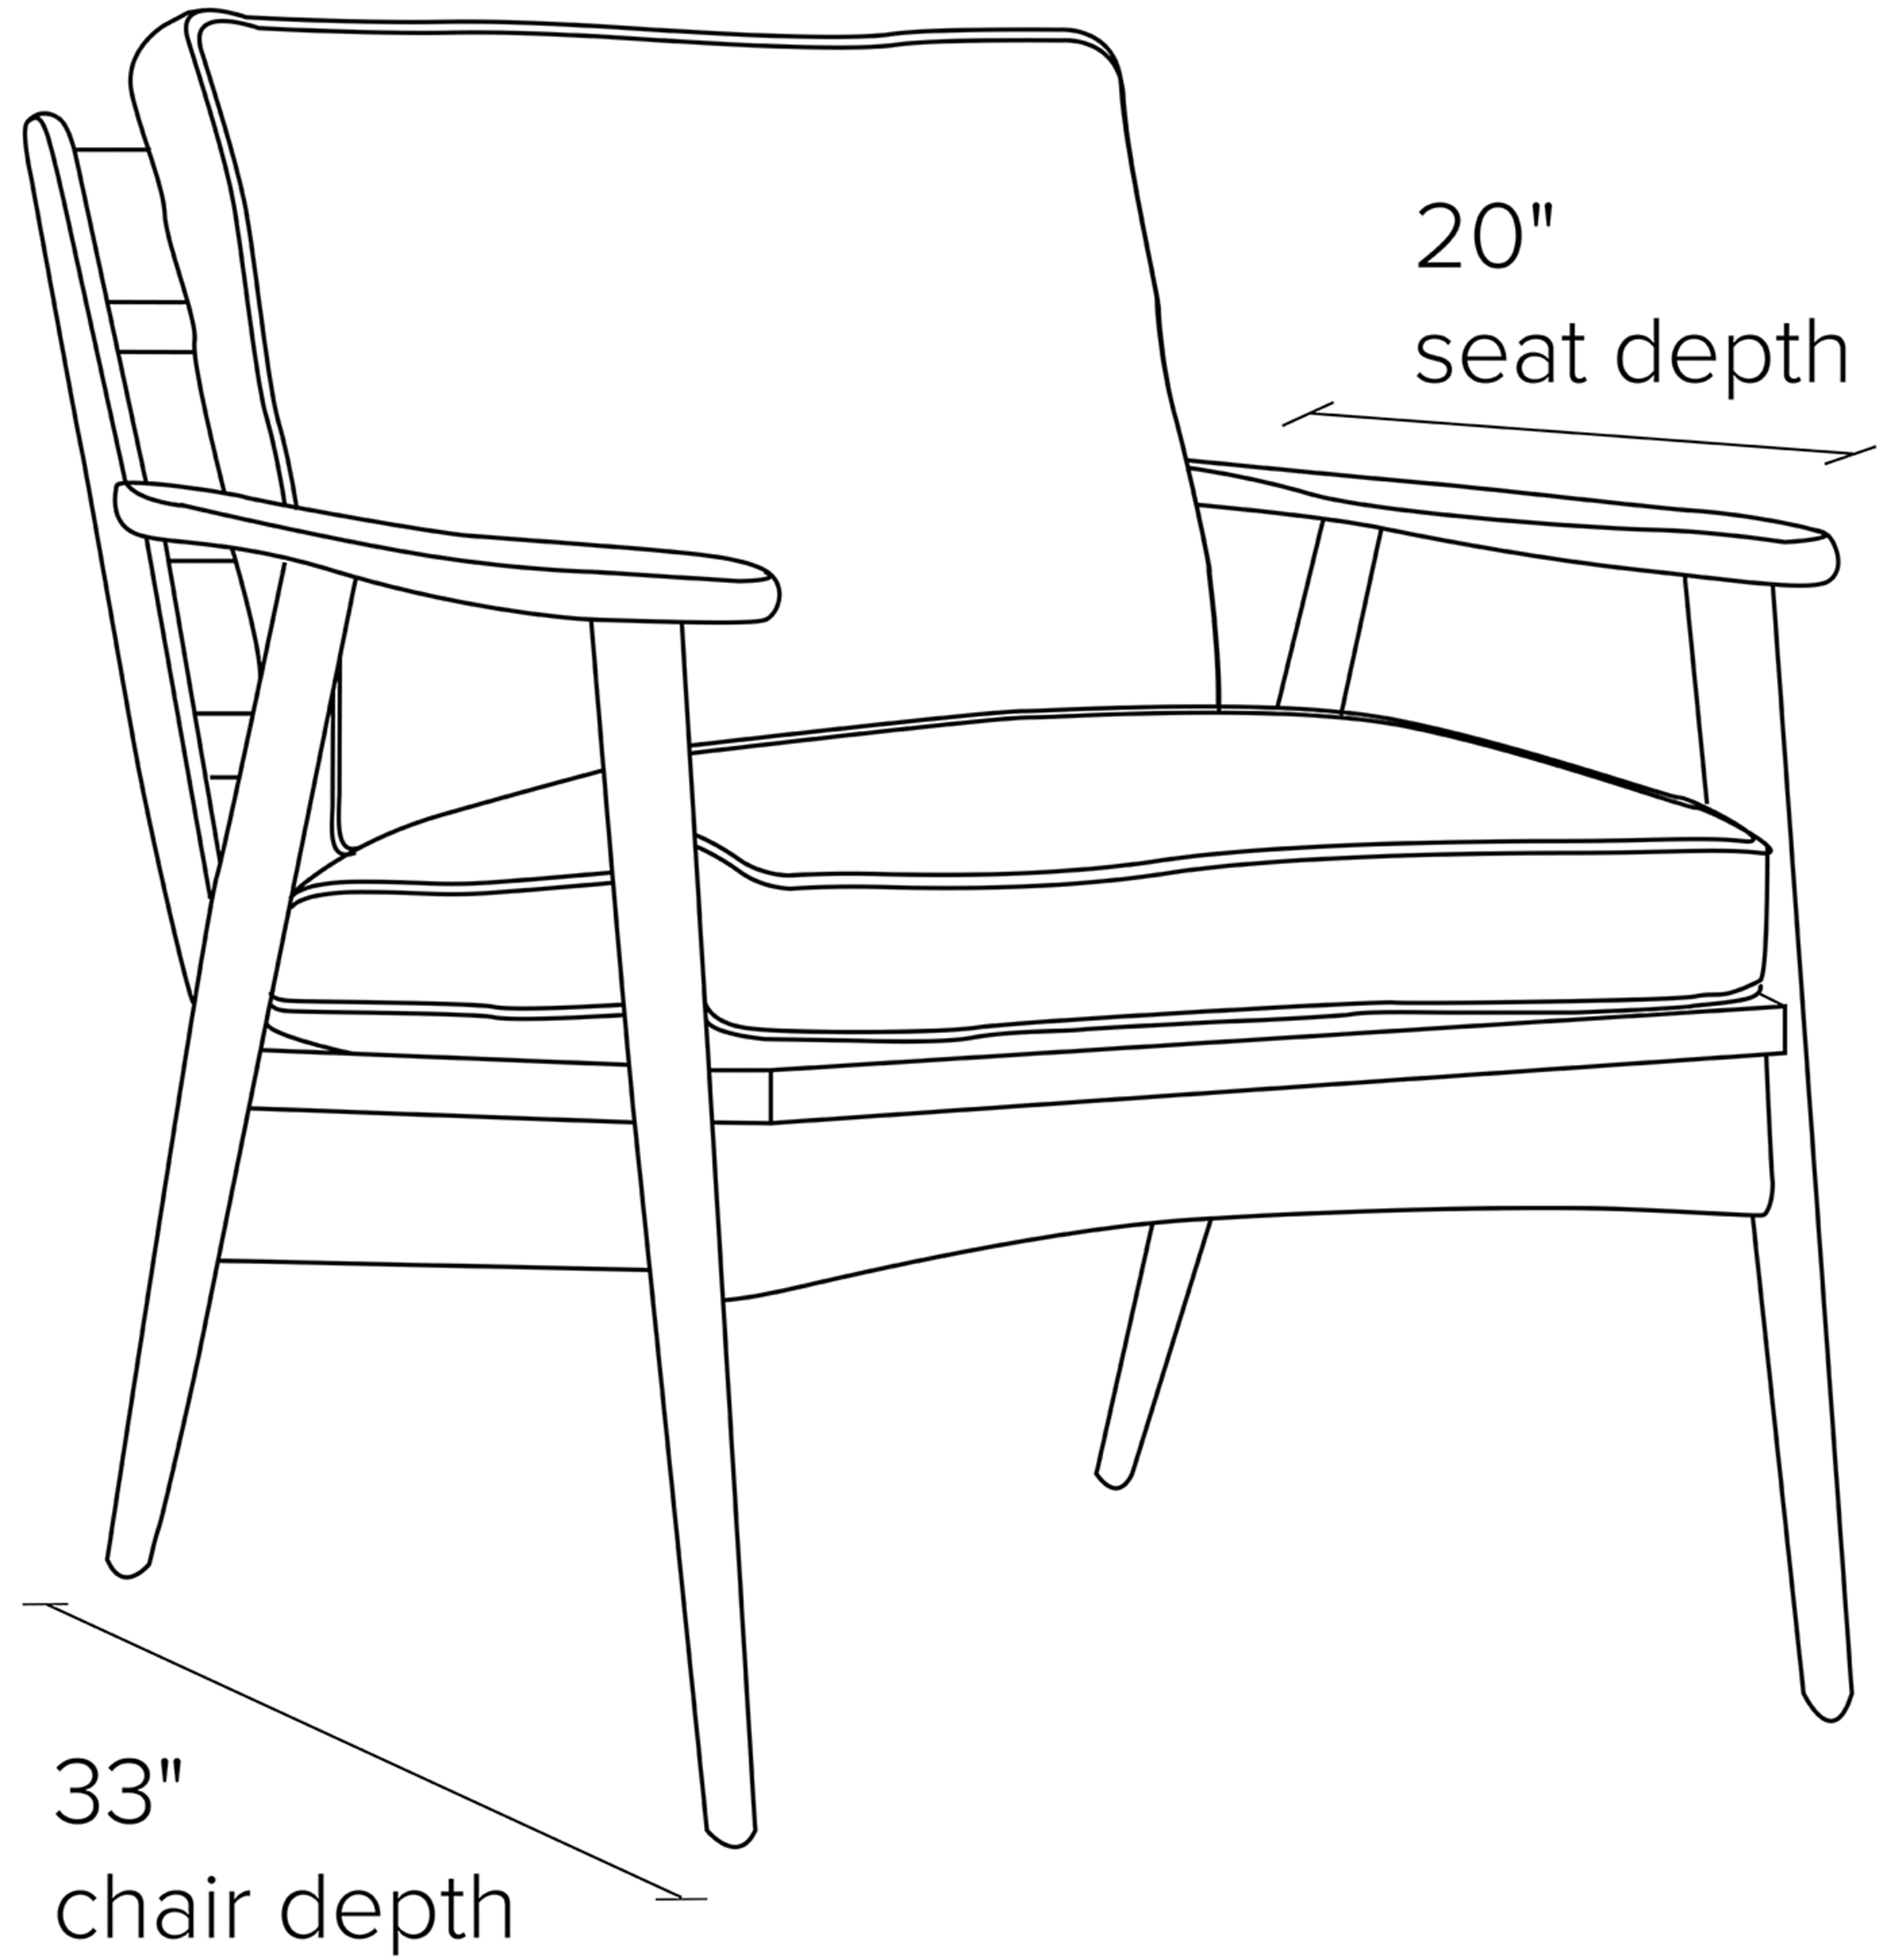 Side view dimension illustration of Ericson chair.